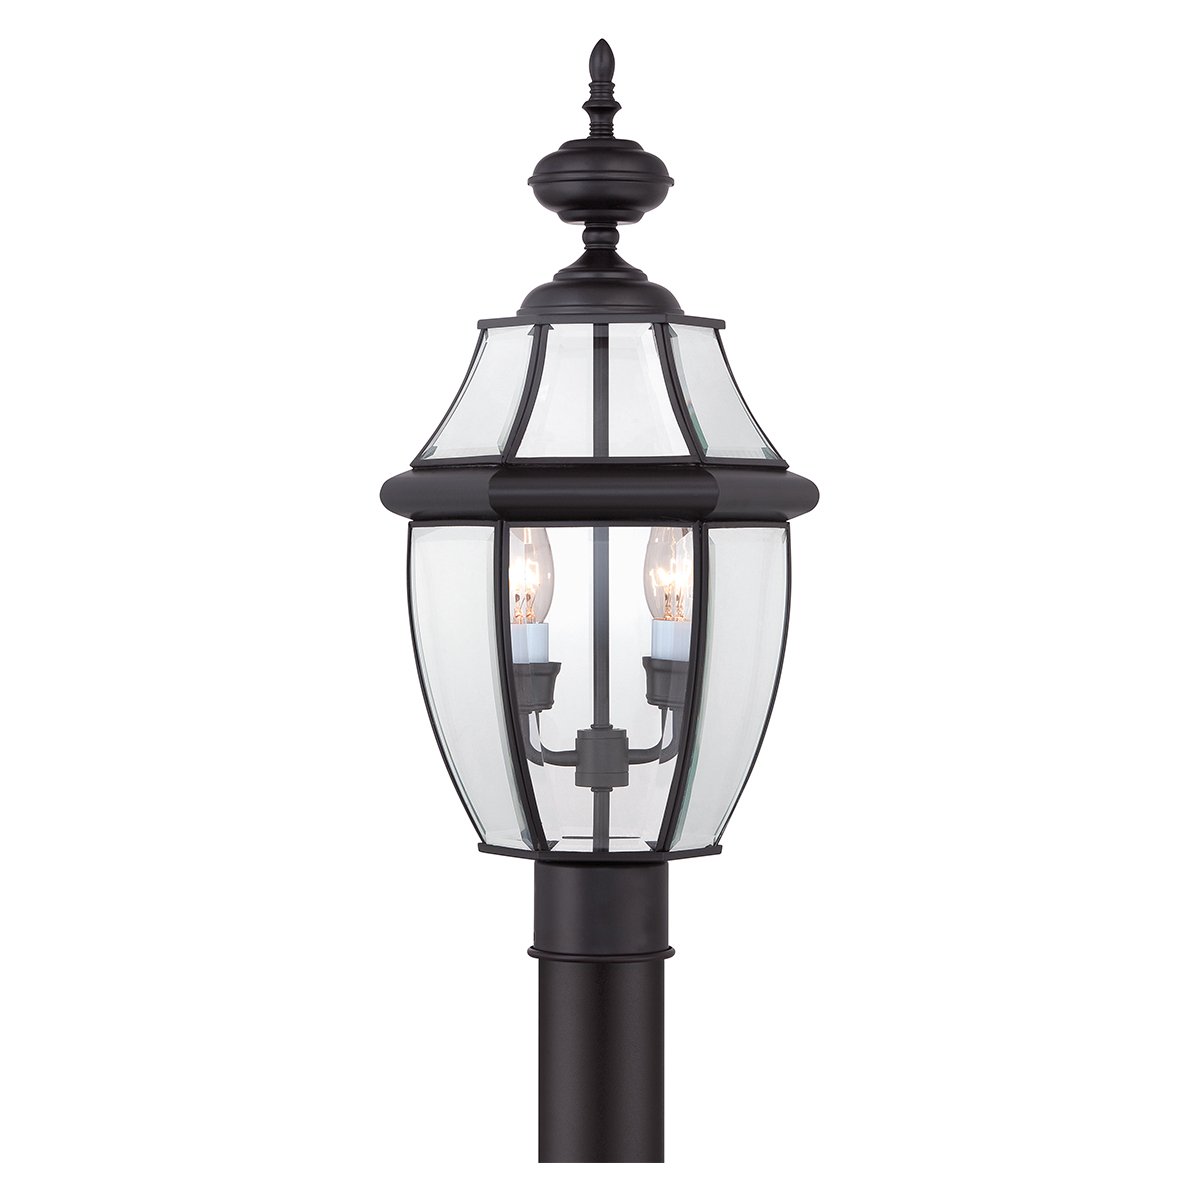 3％OFFクーポン利用でポイント最大8倍相当 Luxury Colonial Outdoor Post Light, Large Size: 21